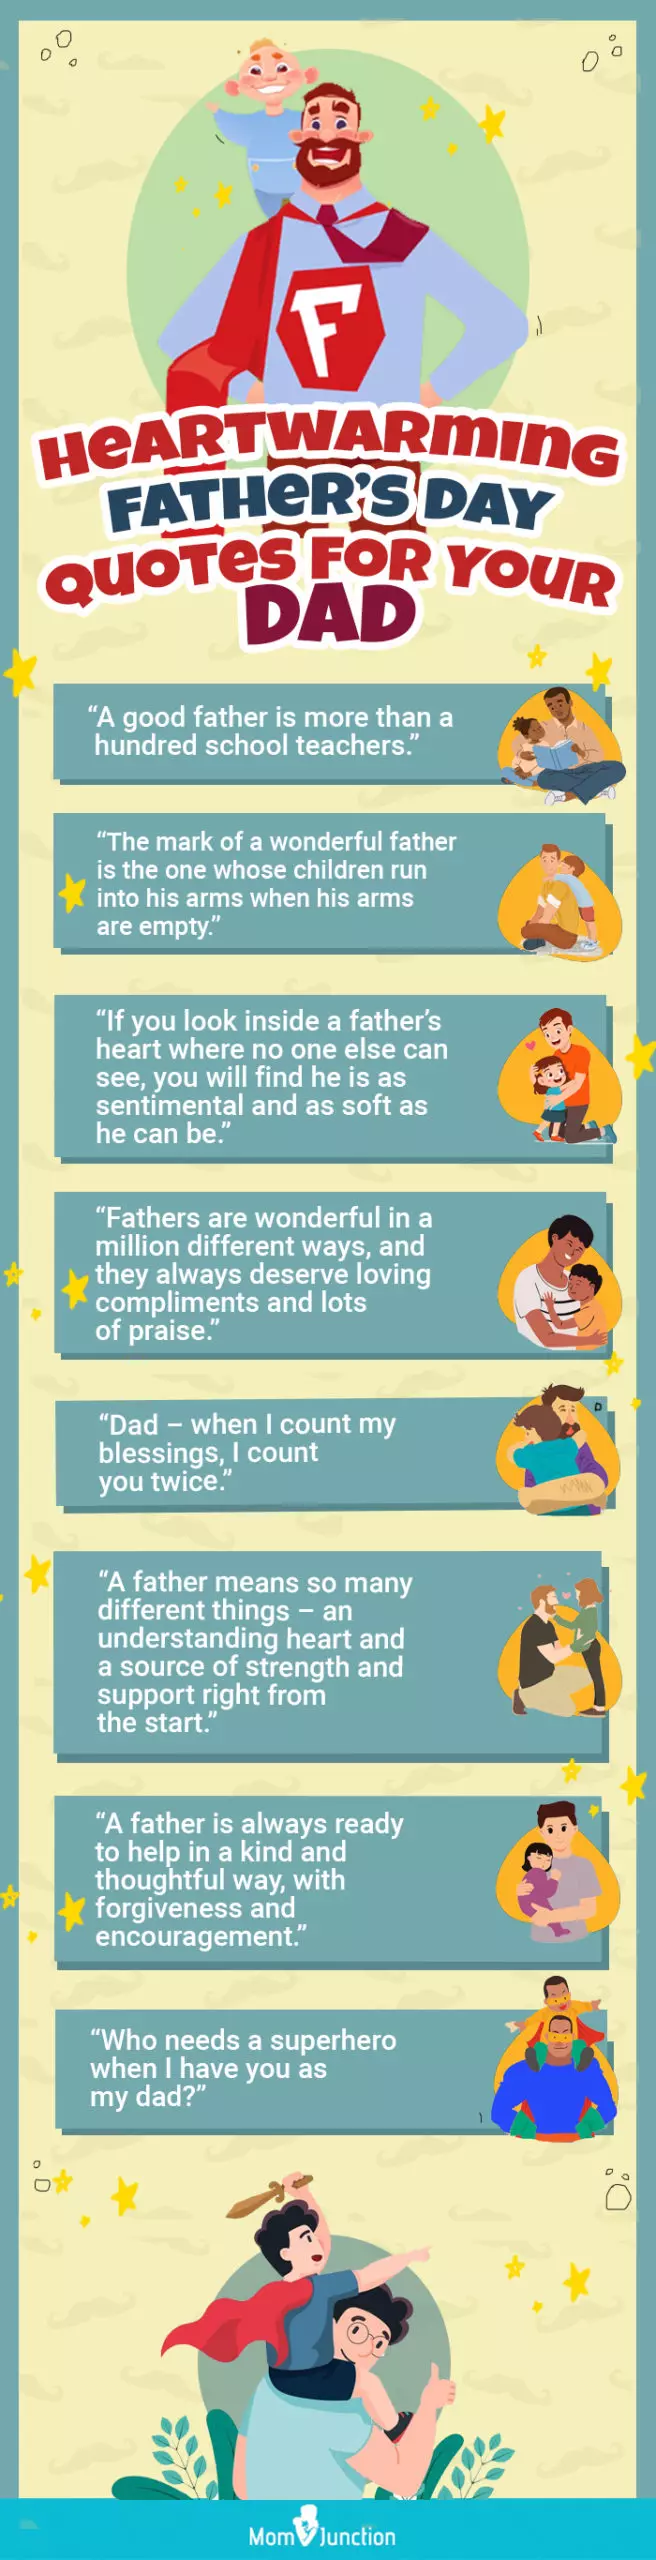 heartwarming fathers day quotes for your dad (infographic)